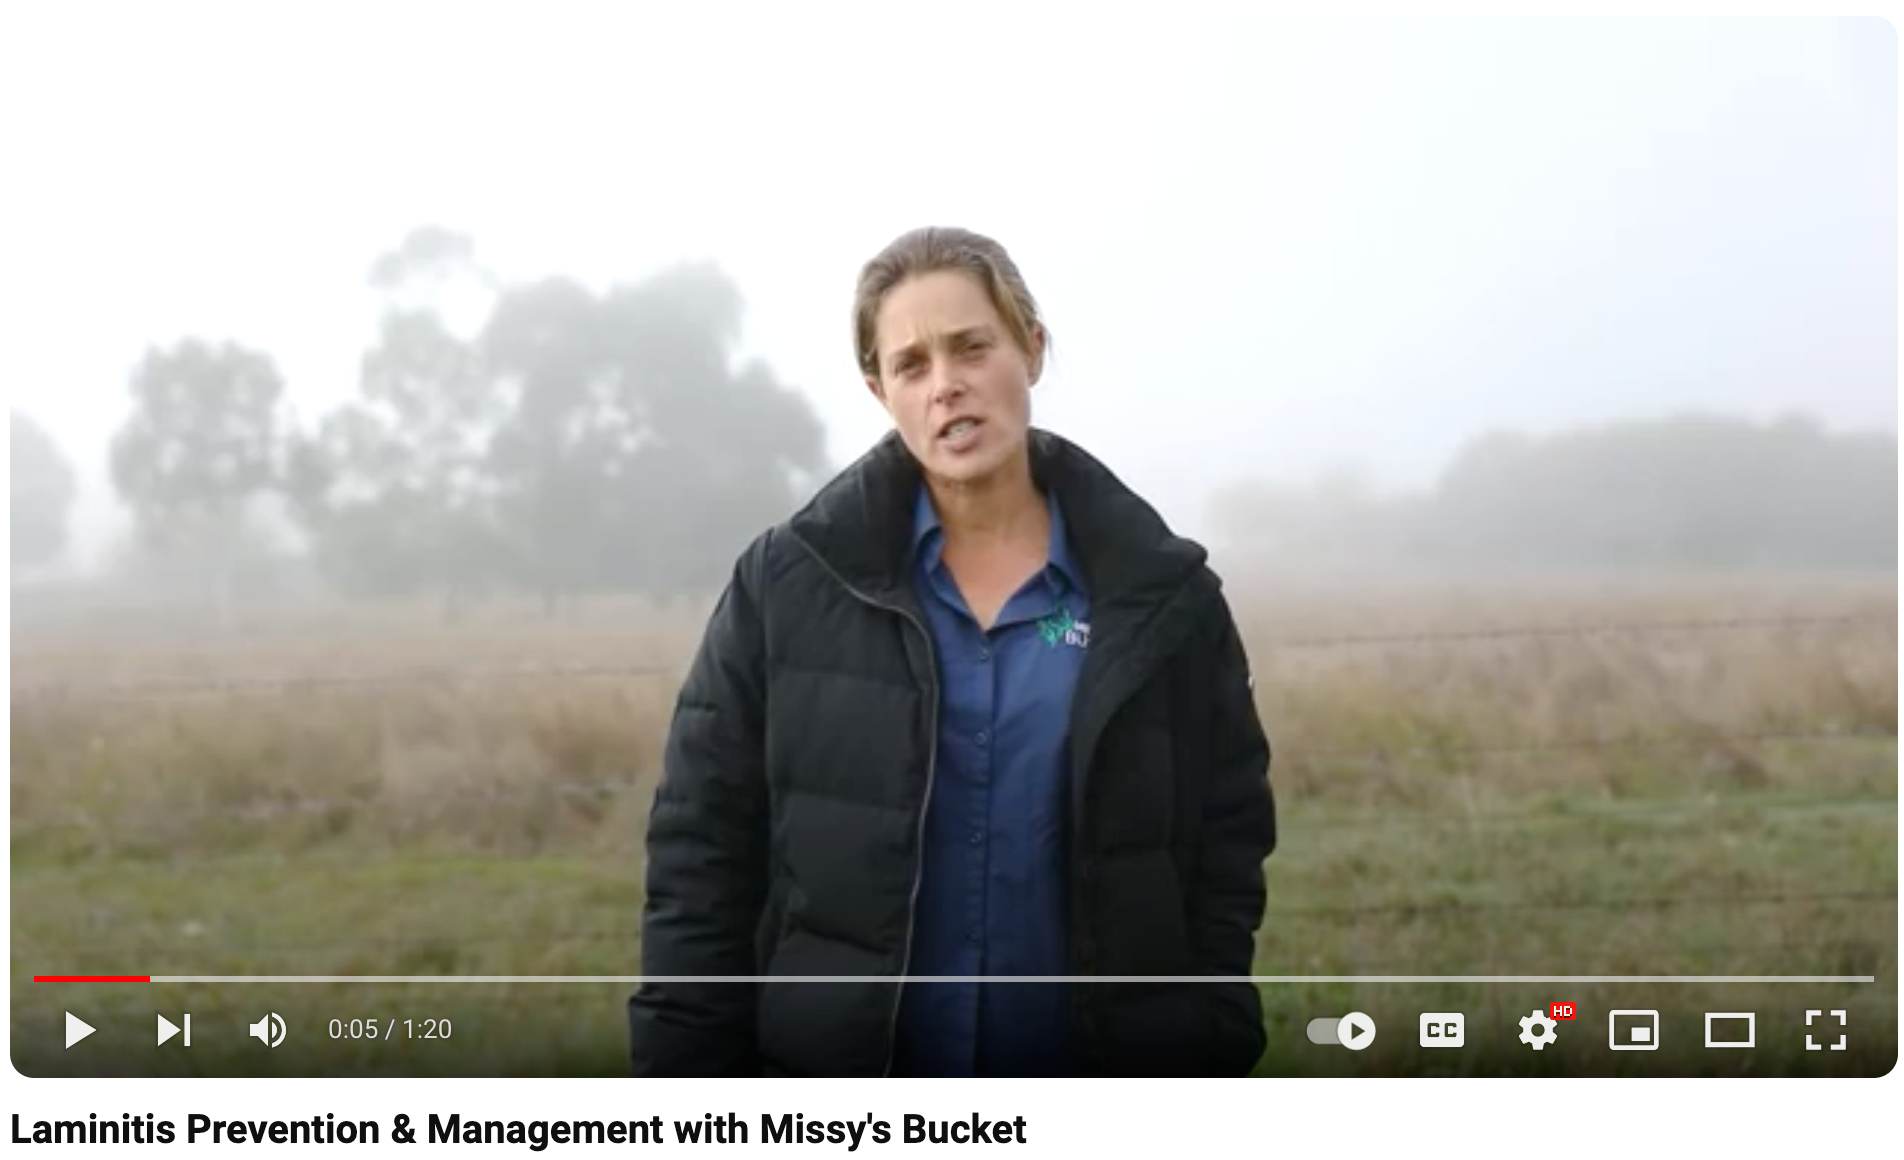 Laminitis Management with Missy's Bucket